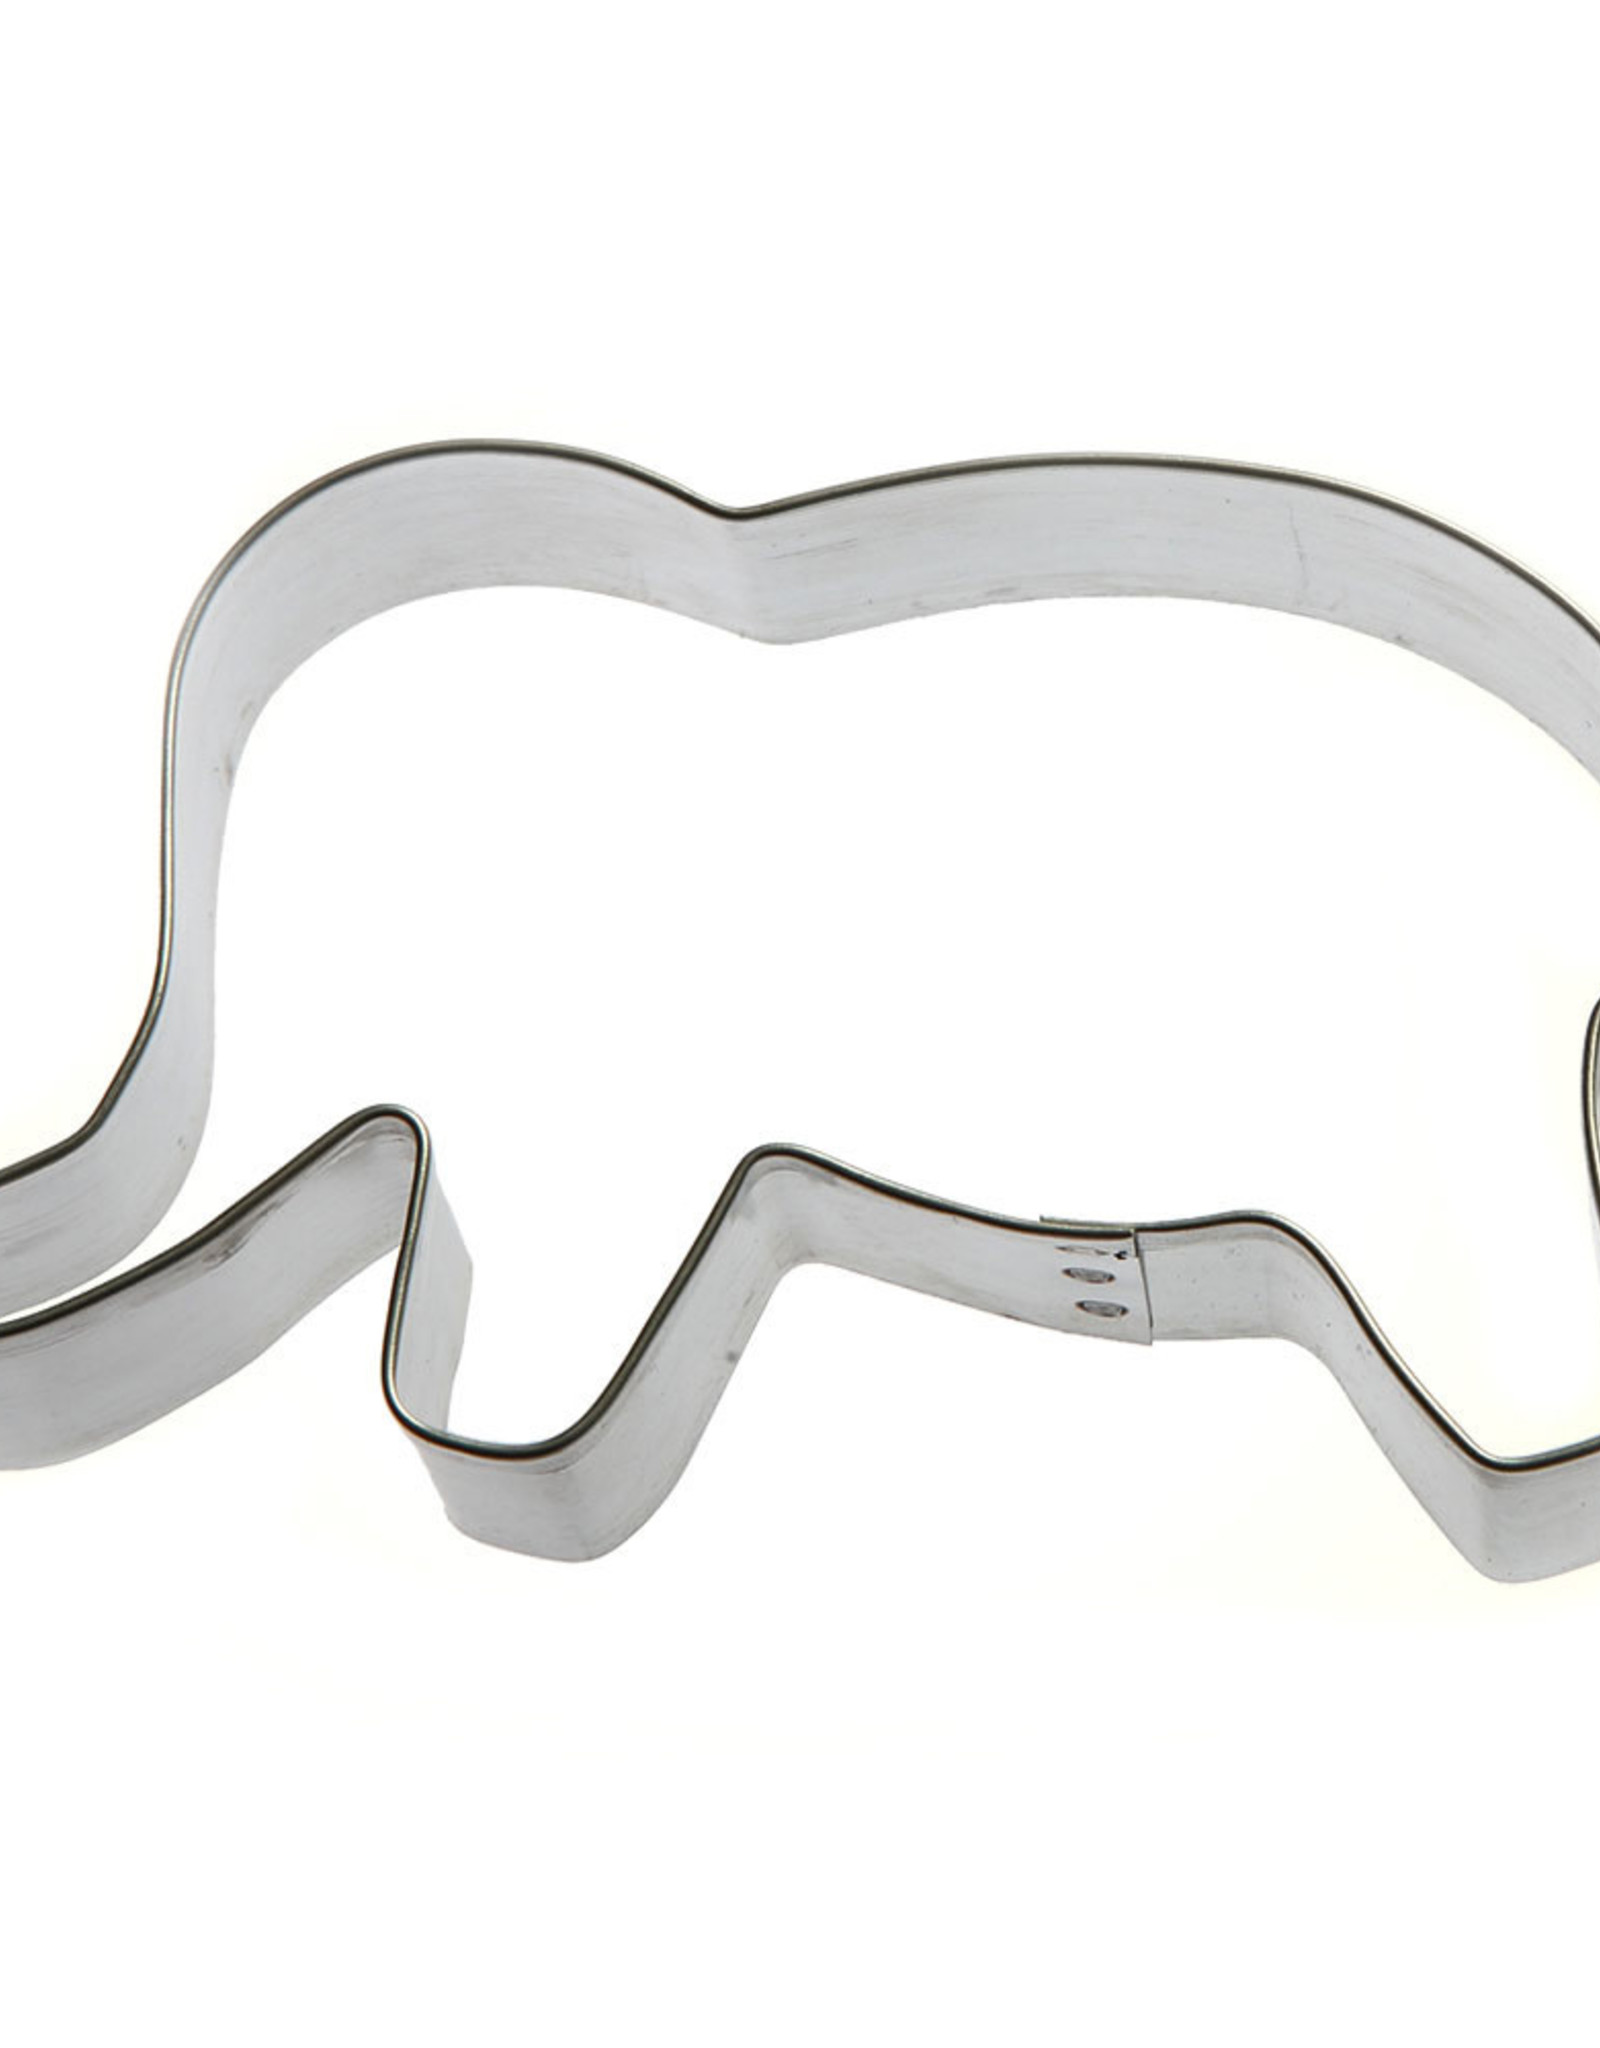 Elephant Cookie Cutter (4")